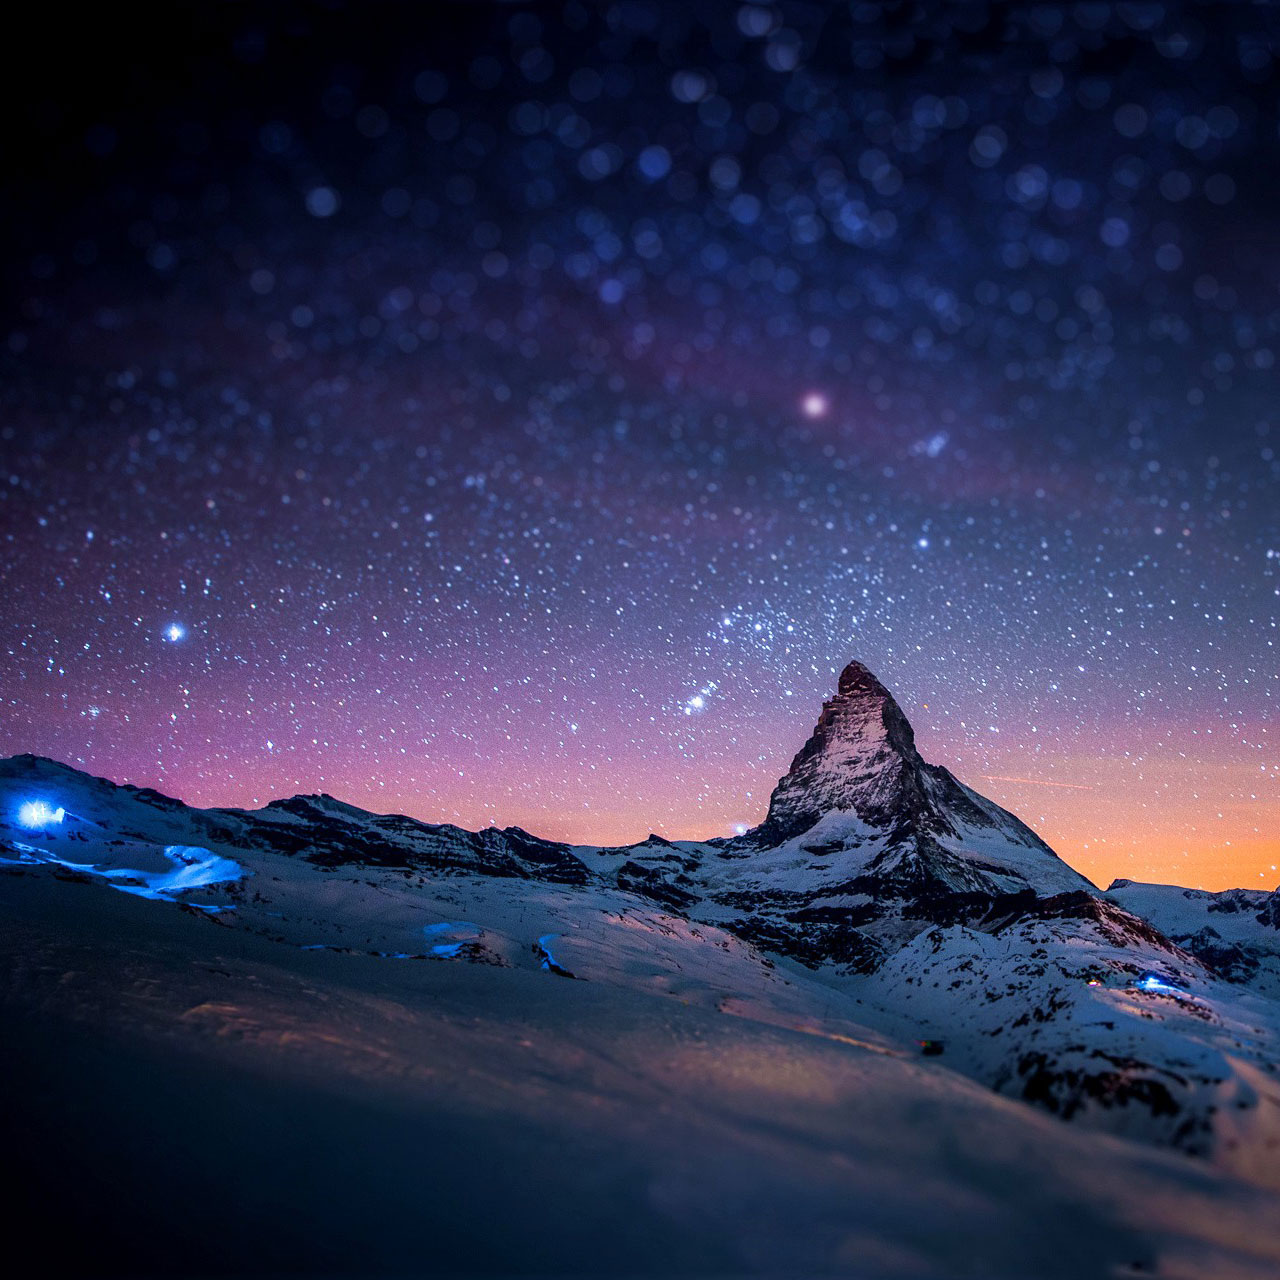 Samsung Galaxy Tab Stars and snow night in the Alps wallpapers